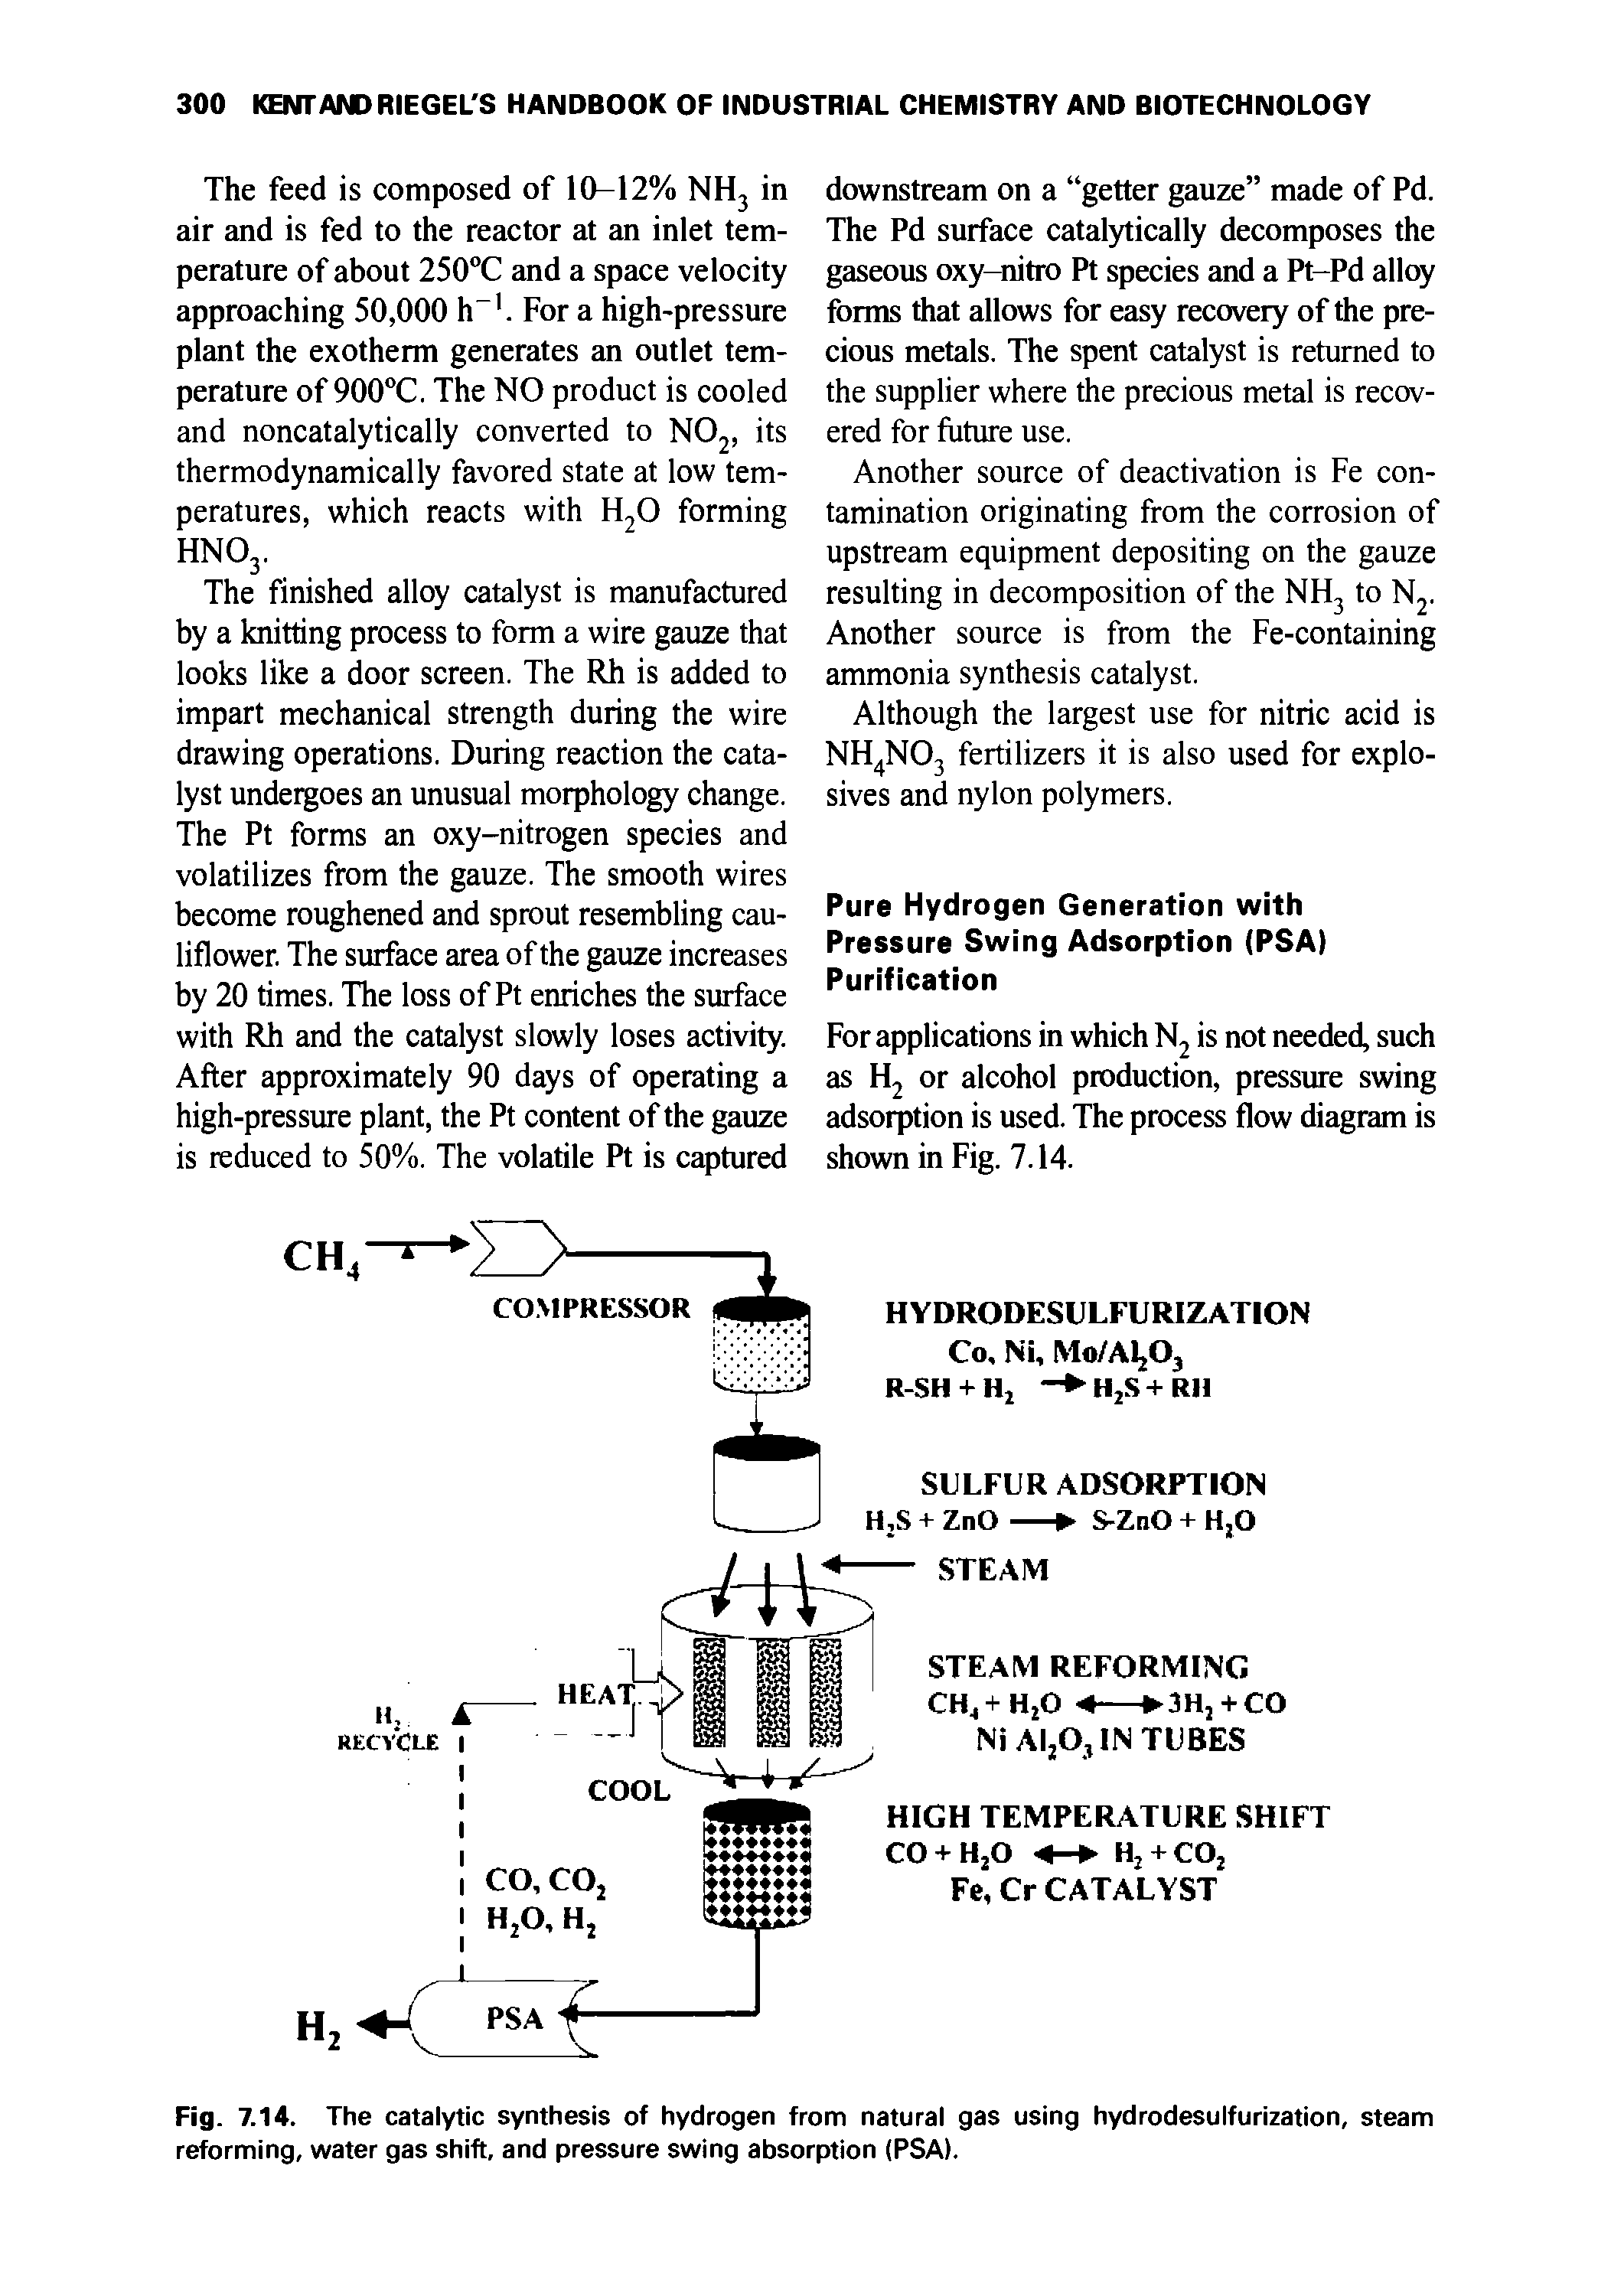 Fig. 7.14. The catalytic synthesis of hydrogen from natural gas using hydrodesulfurization, steam reforming, water gas shift, and pressure swing absorption (PSA).